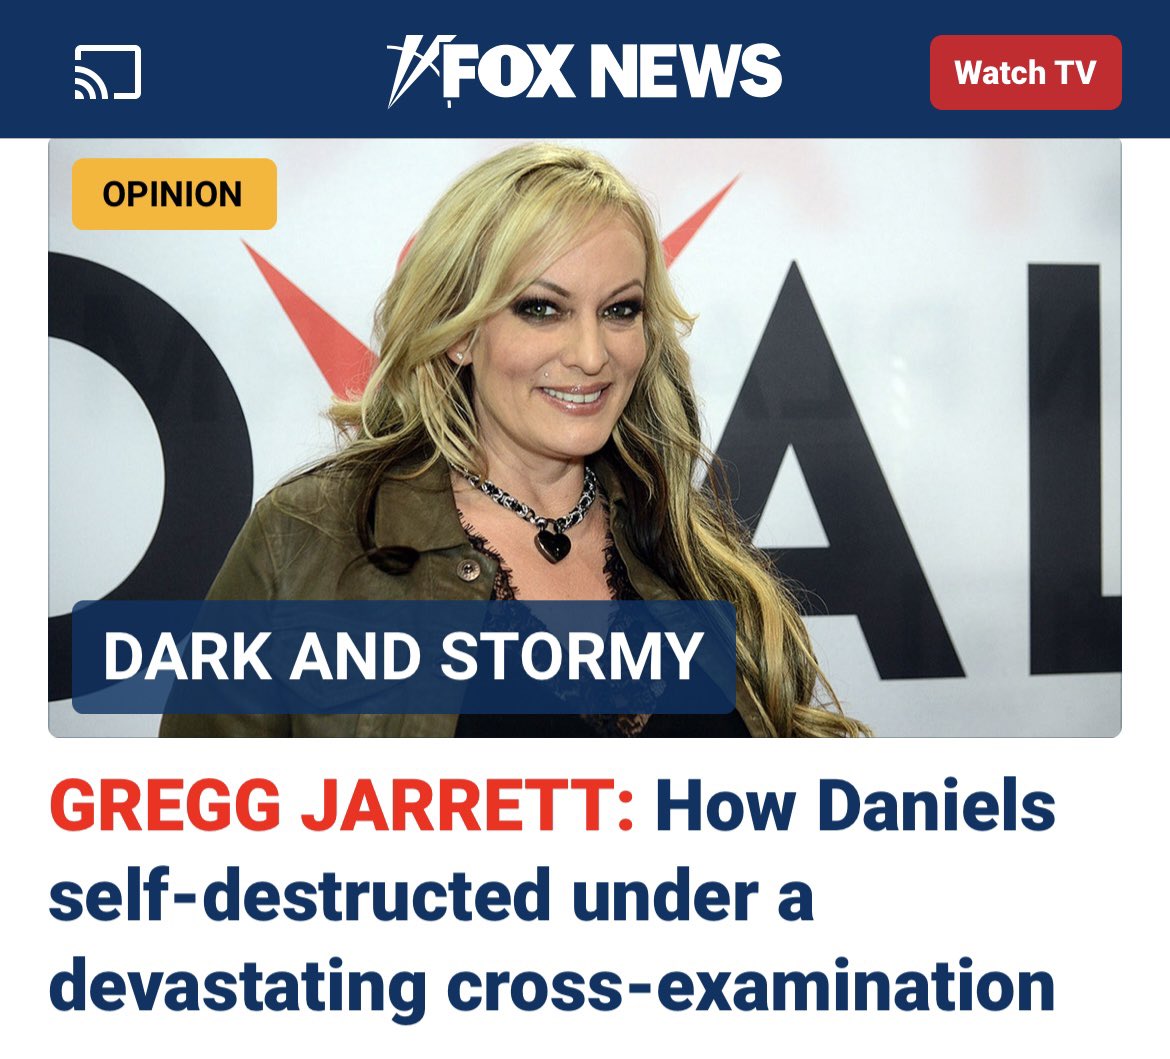 When you wonder why Fox viewers seem to be living in an alternate reality, it’s because this insanity is what they consume day after day.